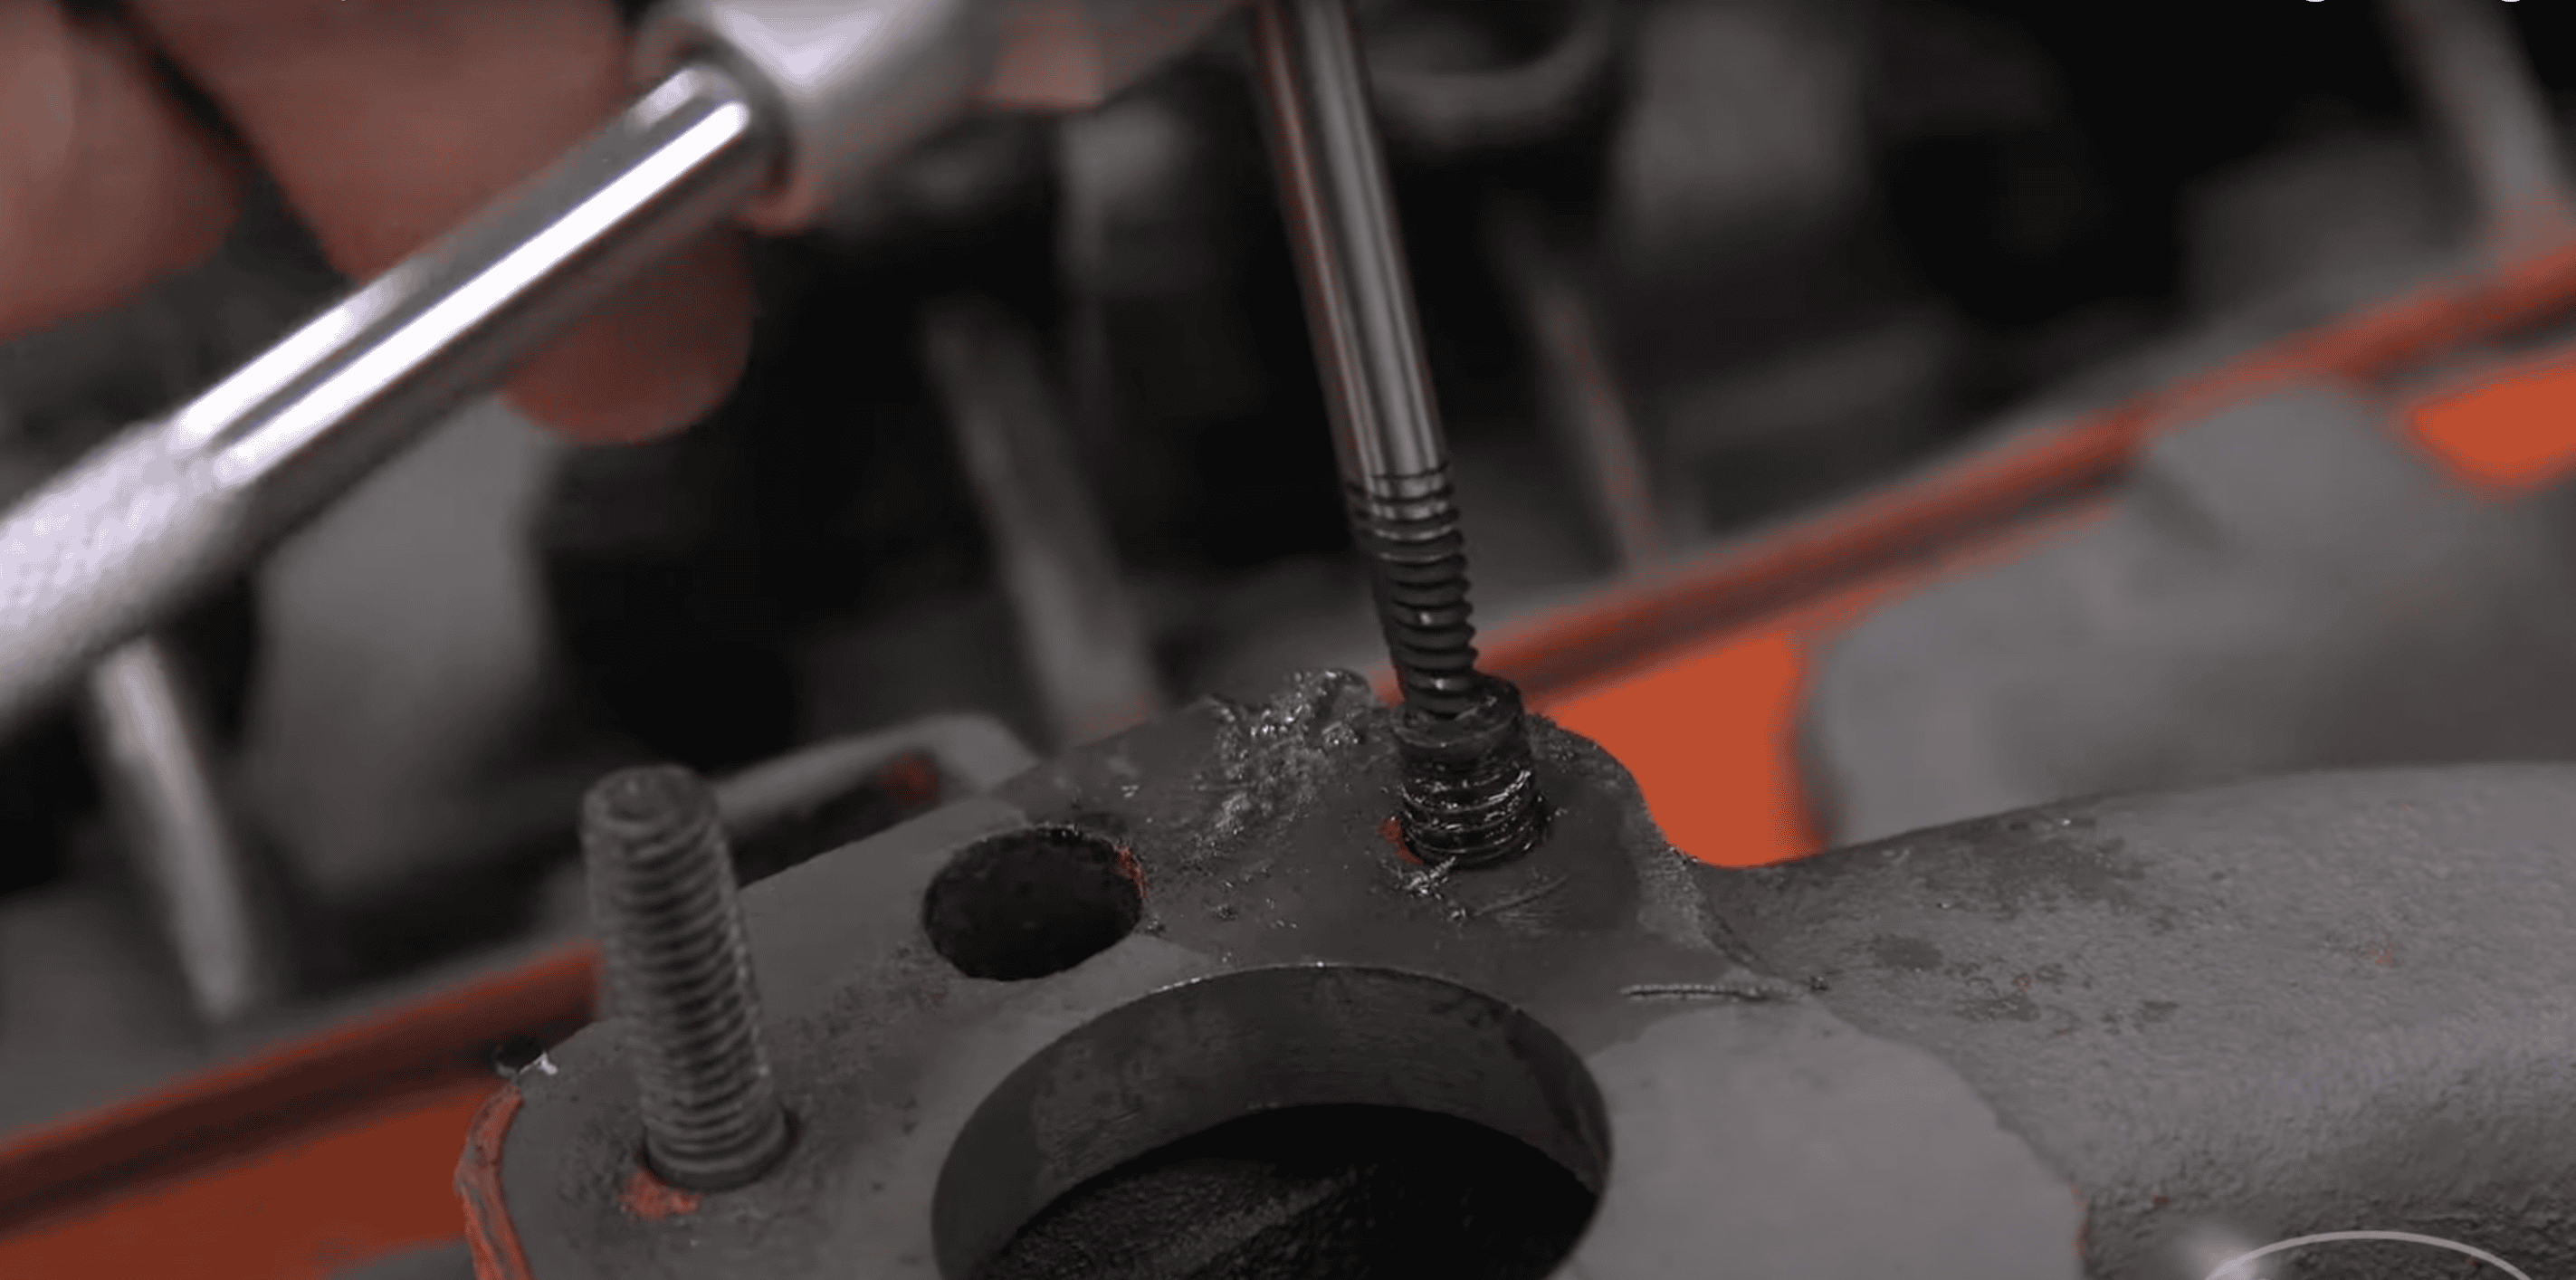 Extract the bolt with screw extractors